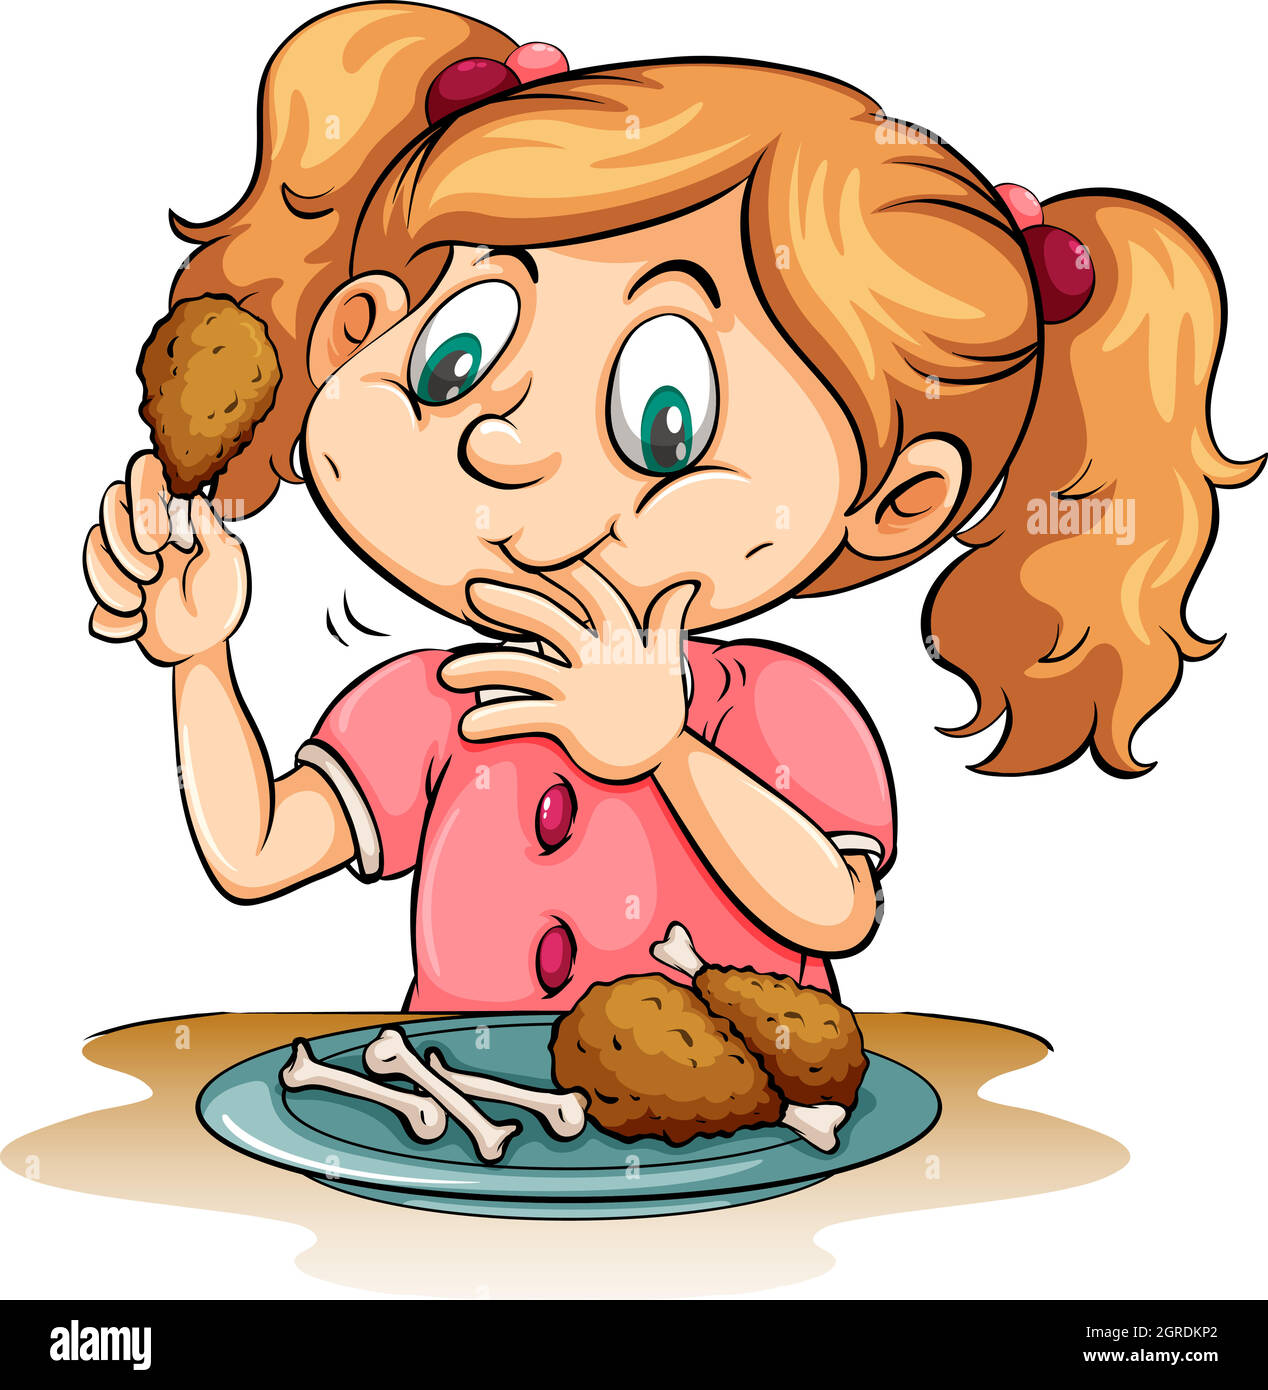 Hungry girl eating chicken Stock Vector